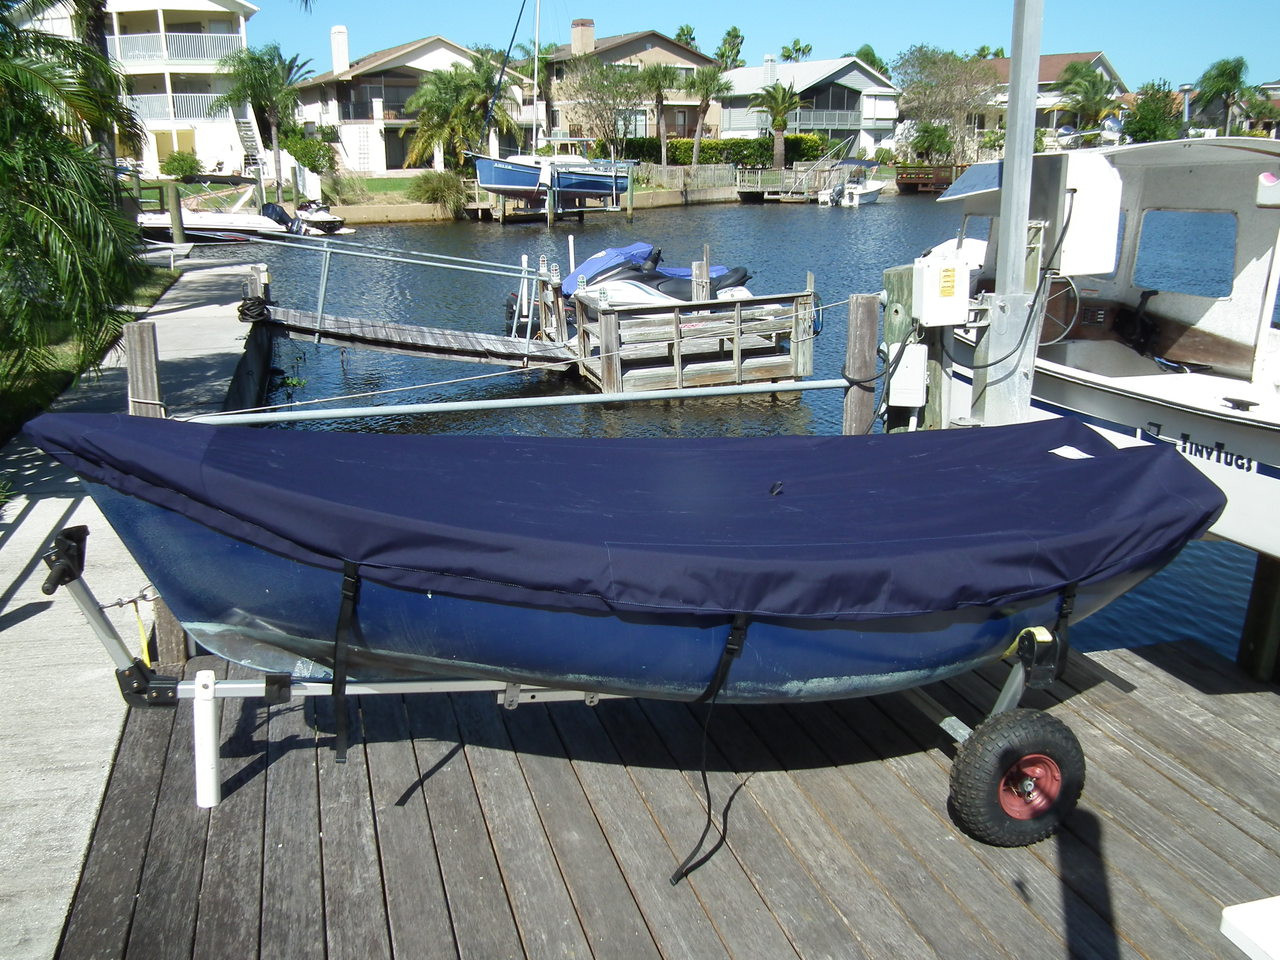 Bauer 10 Sailboat Top Cover - Polyester Navy Blue Deck Cover. Made in America by SLO Sail and Canvas. 